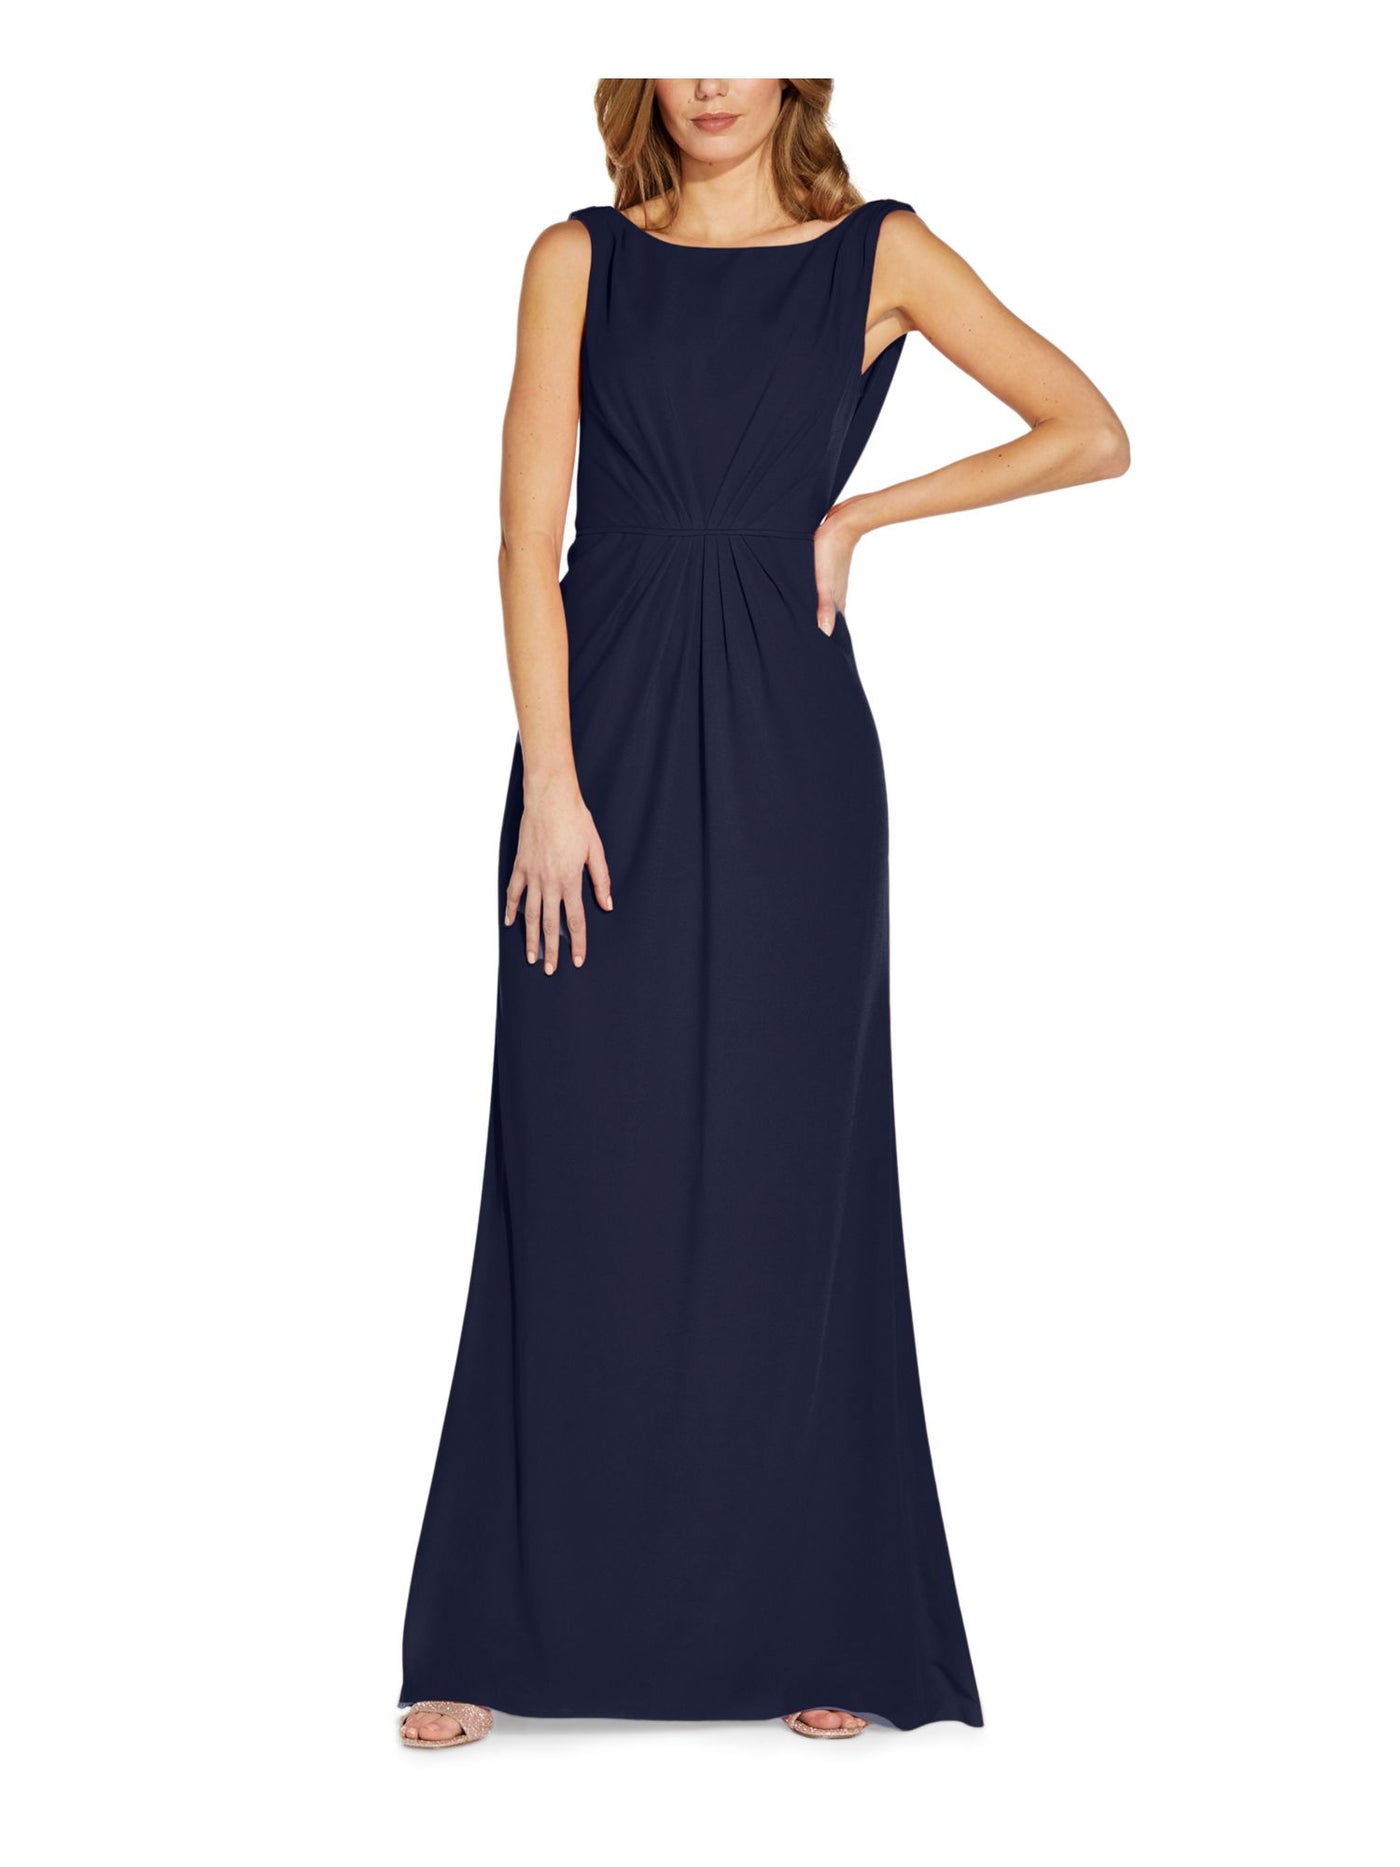 ADRIANNA PAPELL Womens Navy Stretch Pleated Zippered Drape Back Sleeveless Full-Length Formal Gown Dress 18